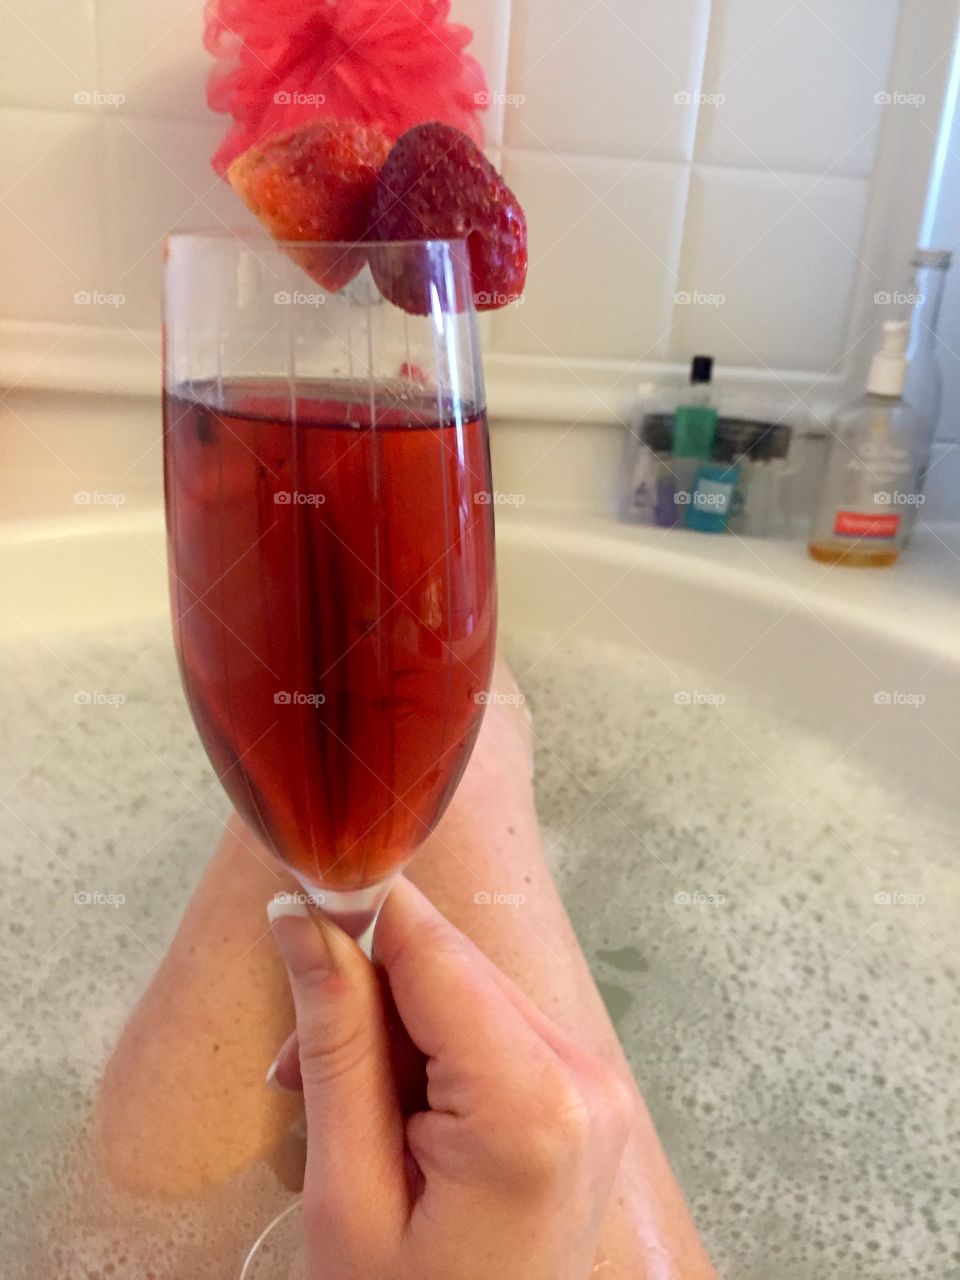 Nothing quite like. Bubble bath with a cranberry mimosa